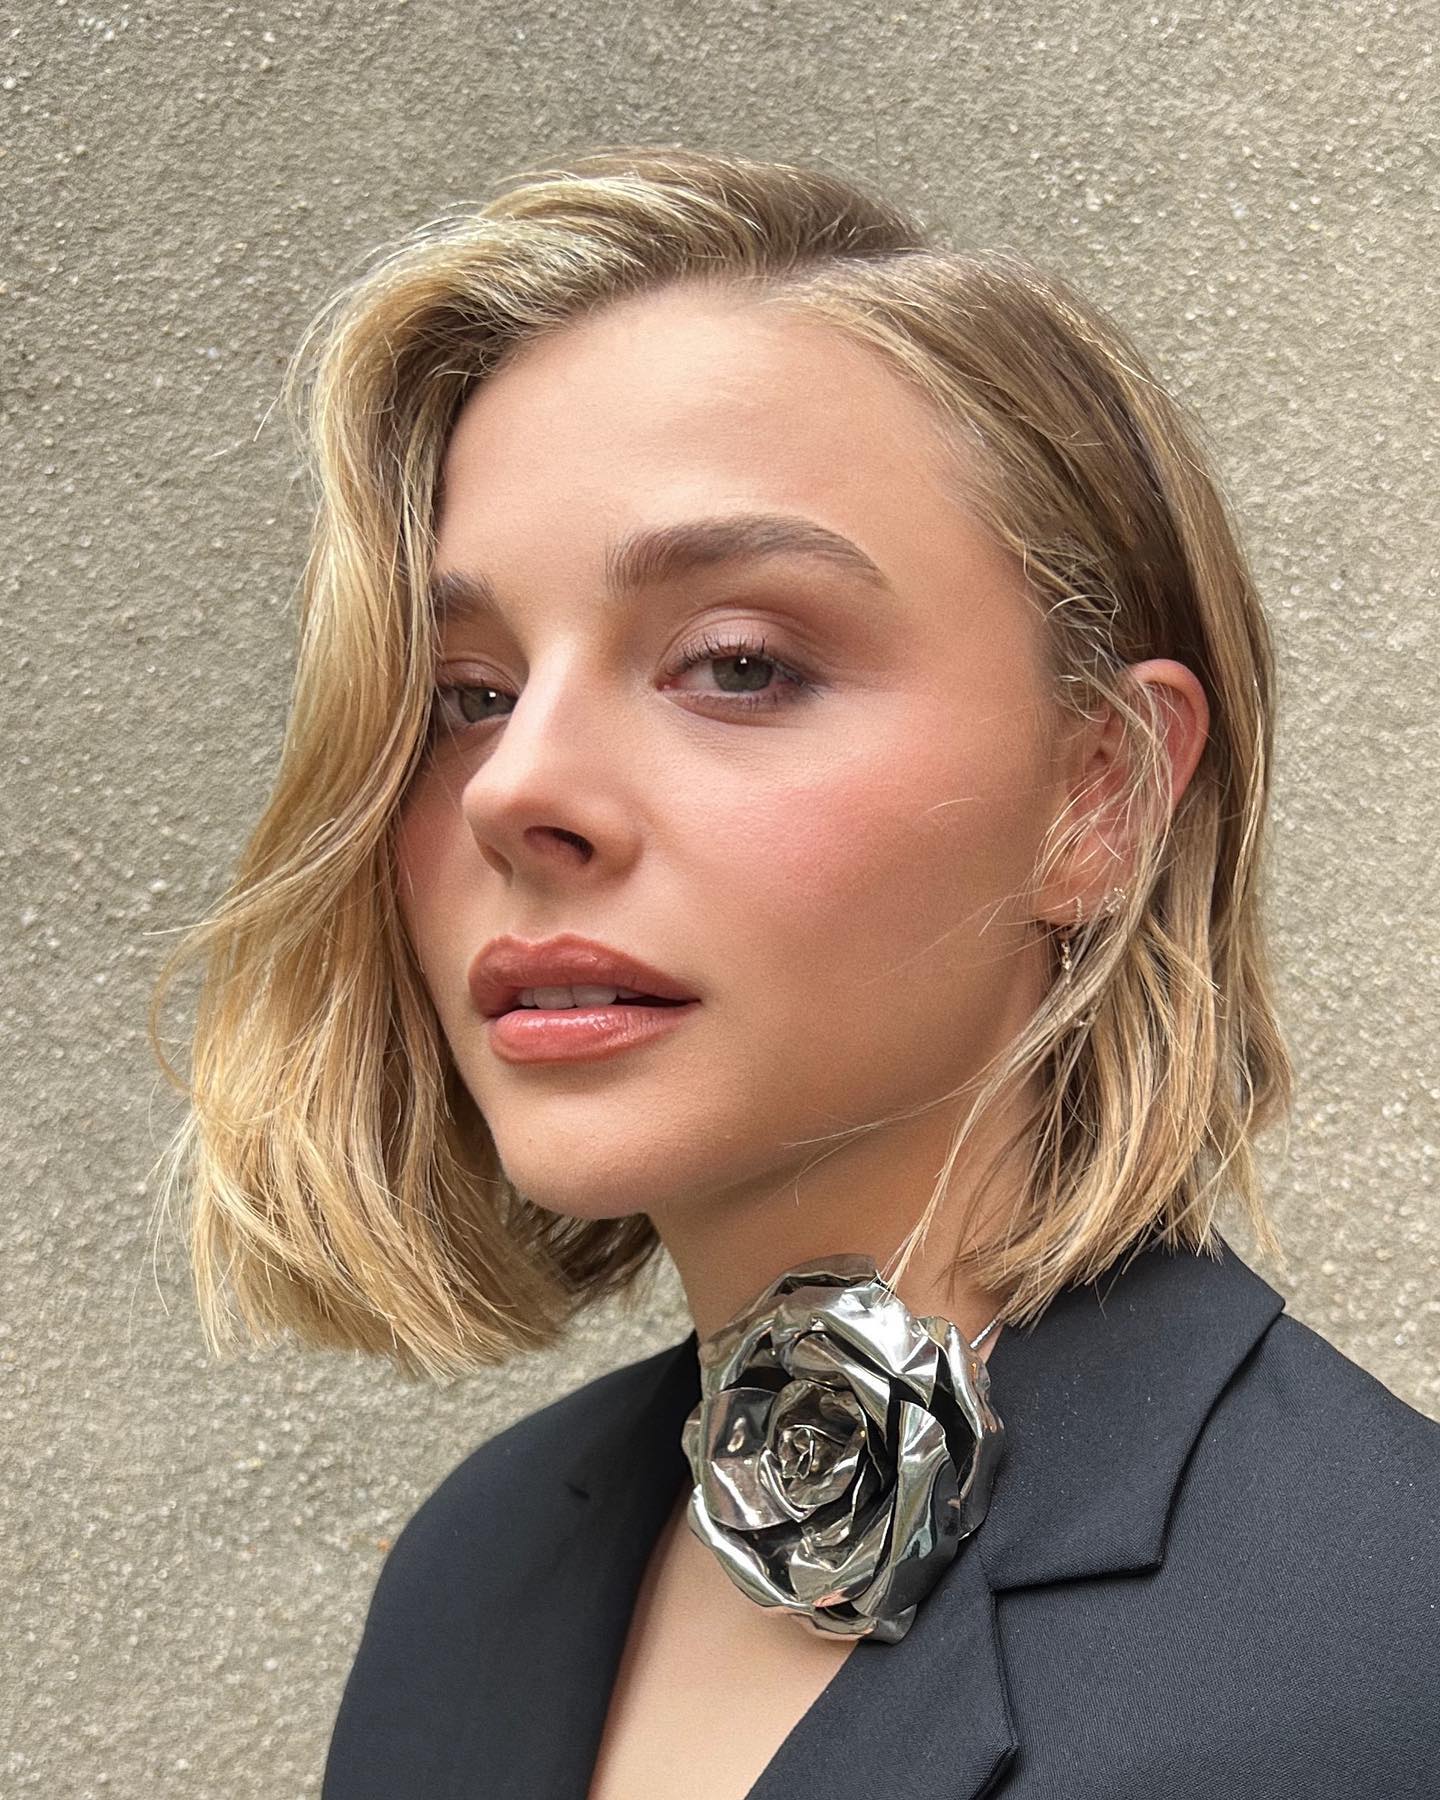 Stacked bob hair trend on wavy hair: @gregoryrussellhair